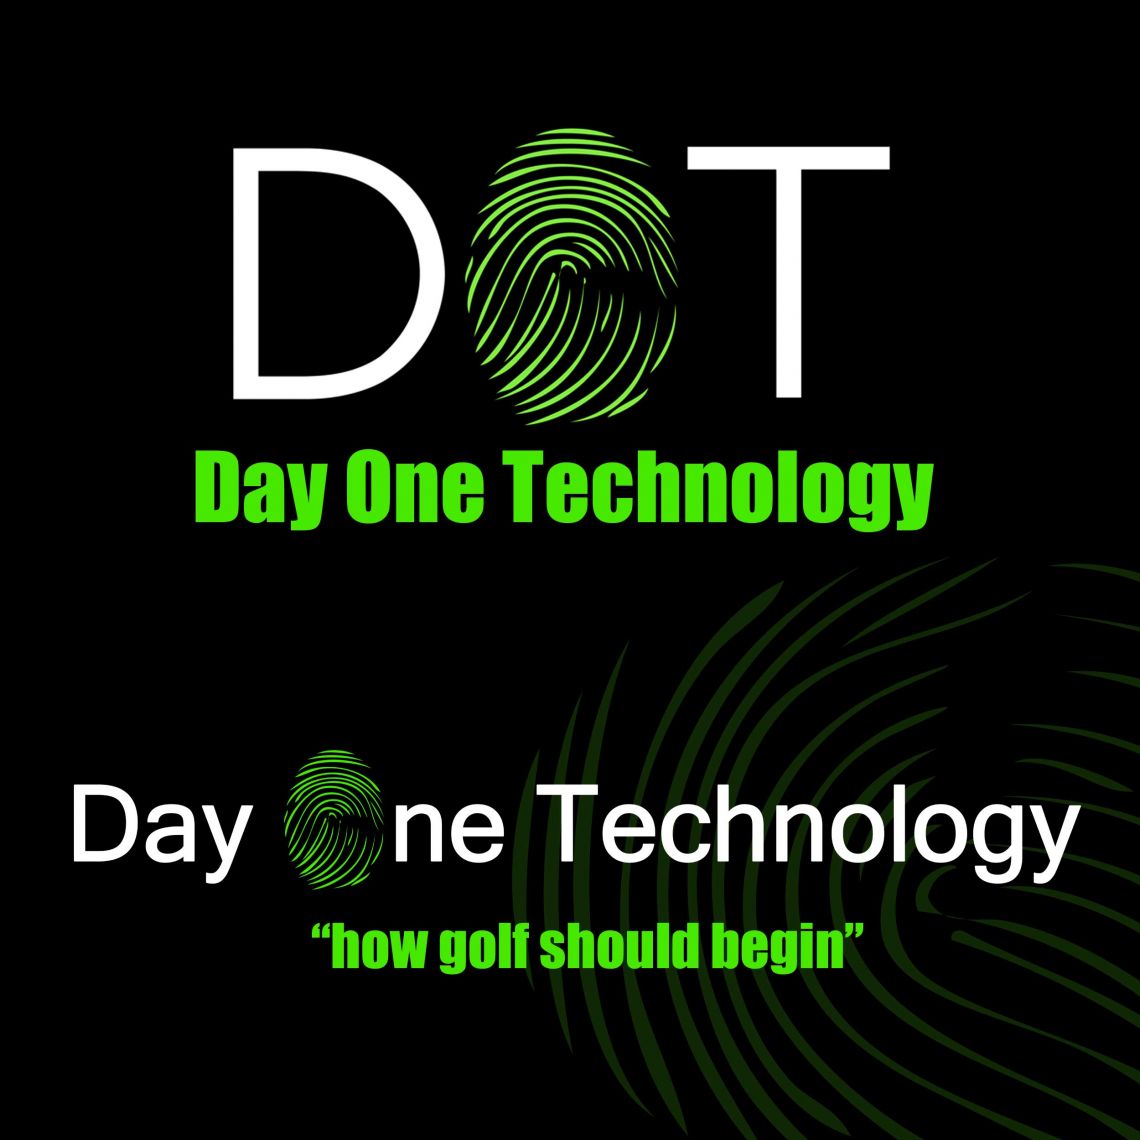 Day One Technology